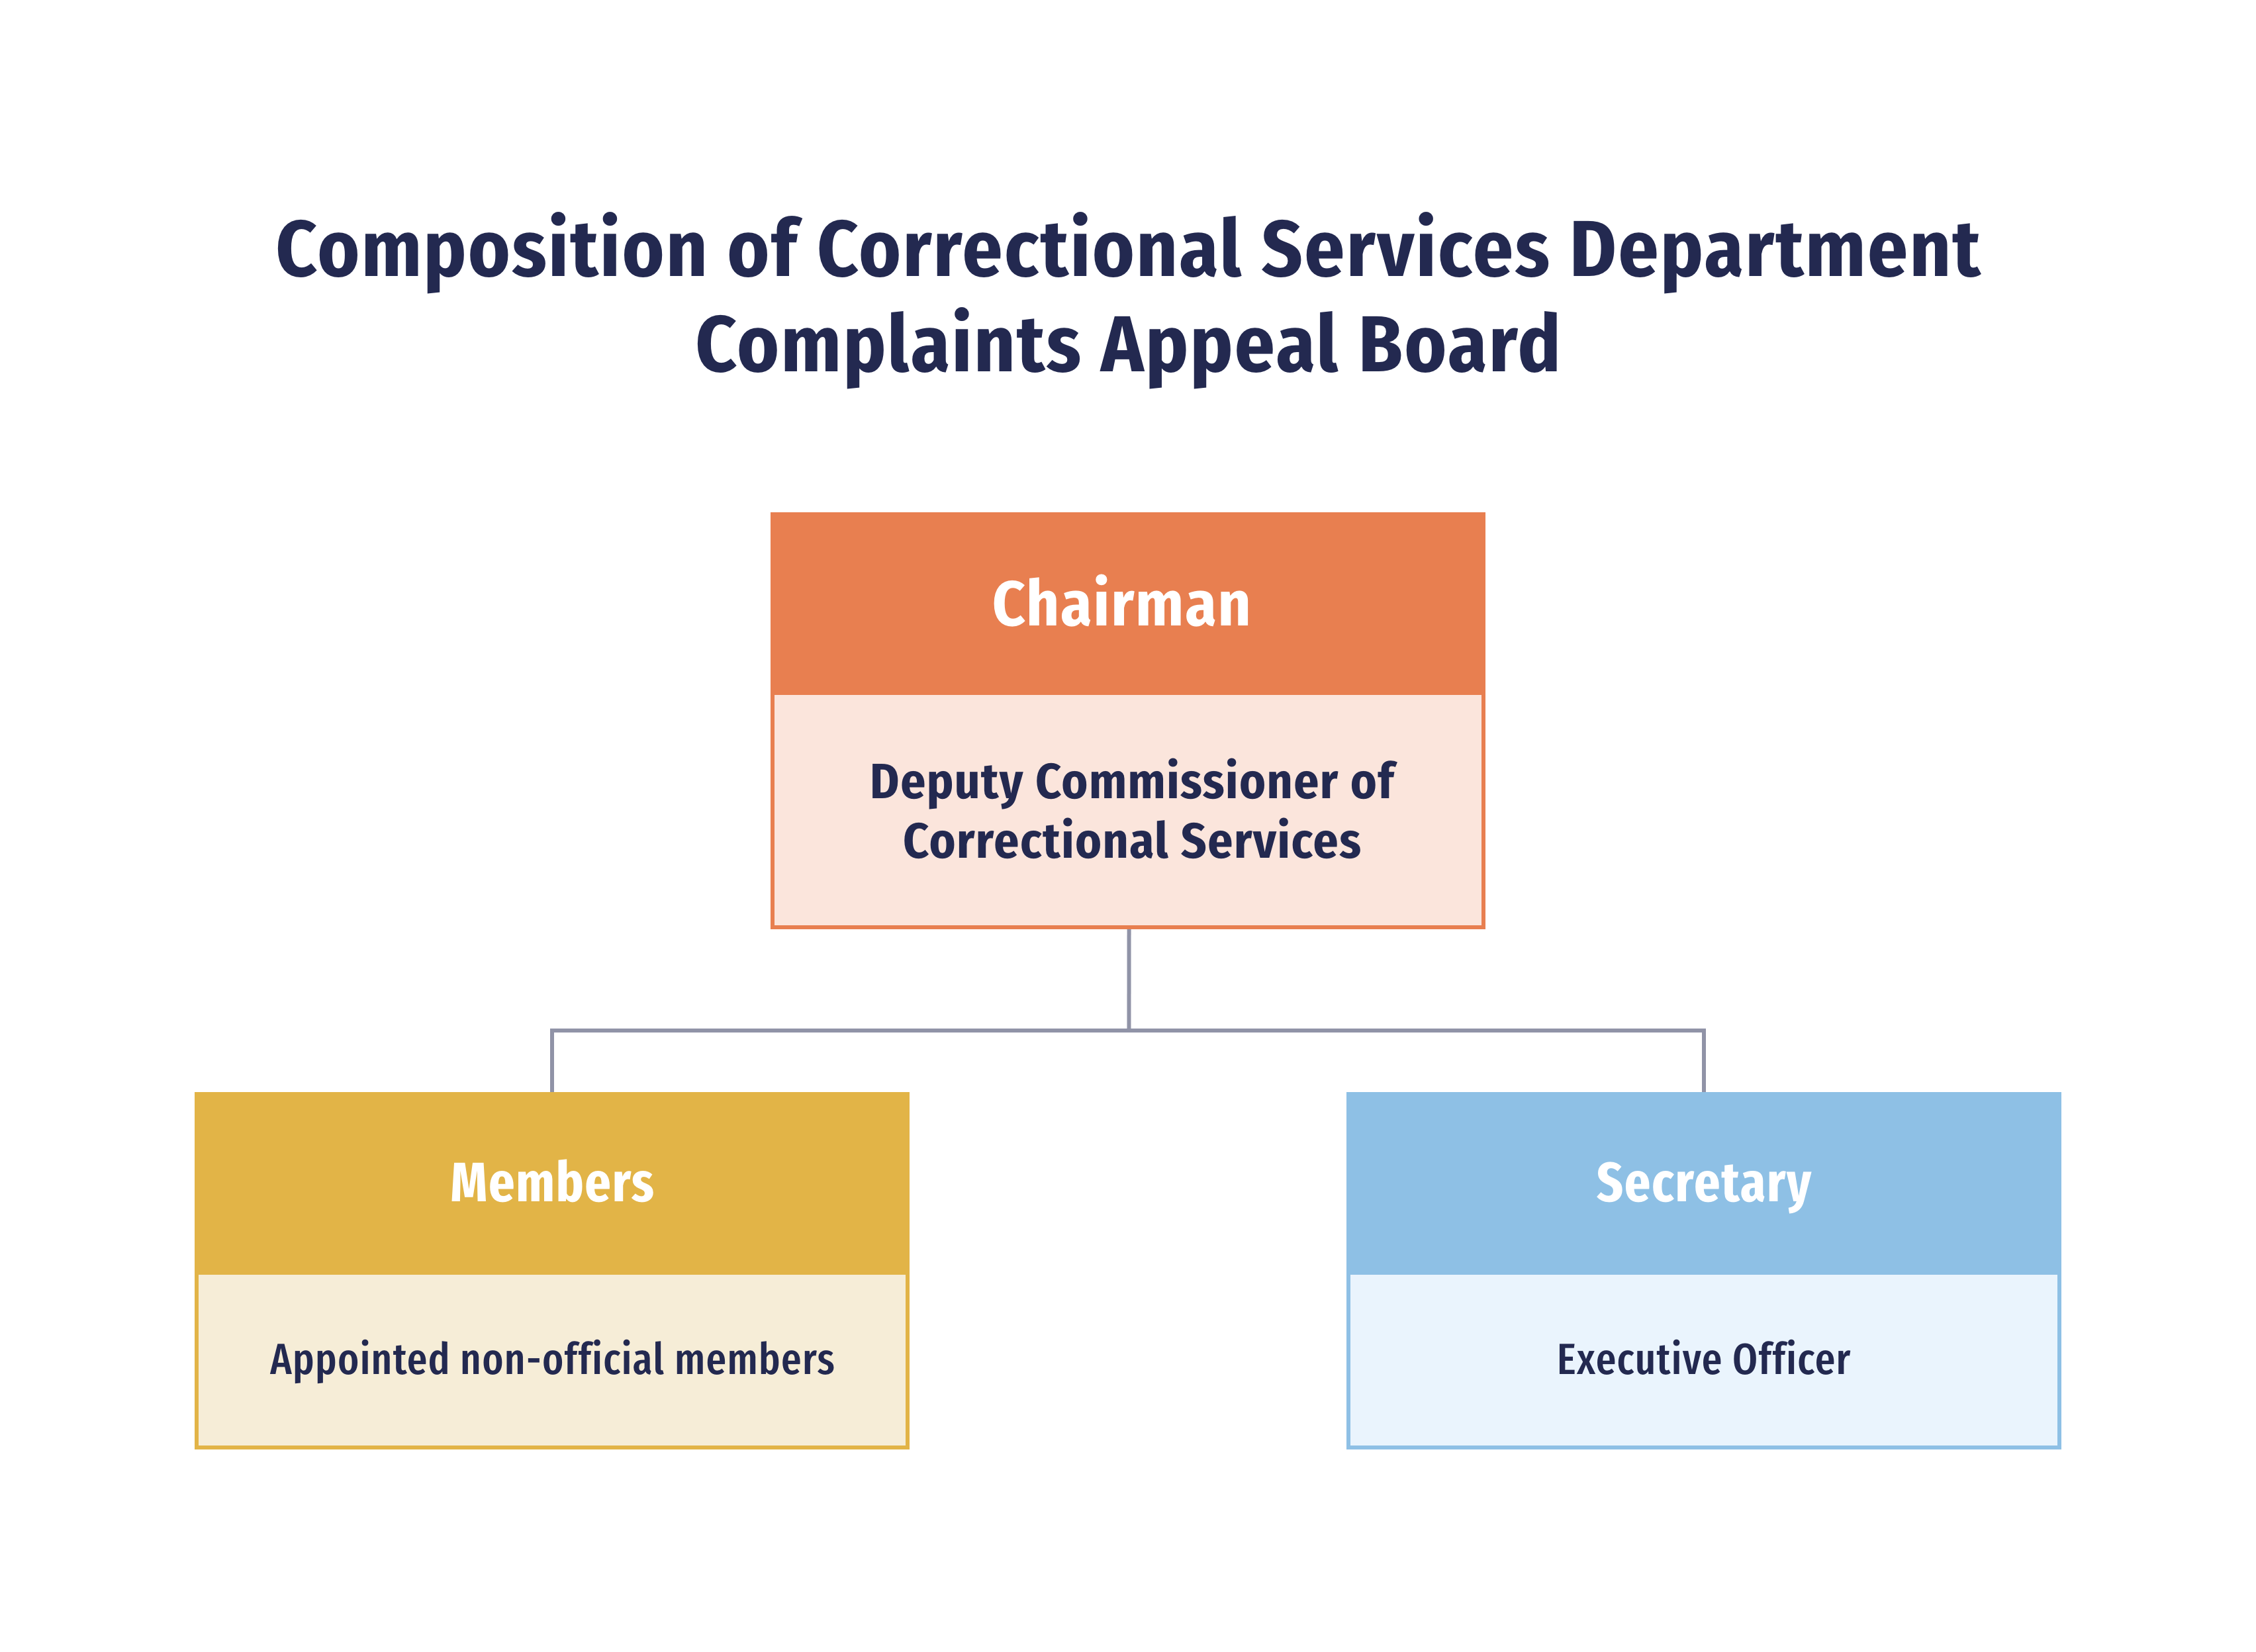 Composition of Correctional Services Department Complaints Appeal Board